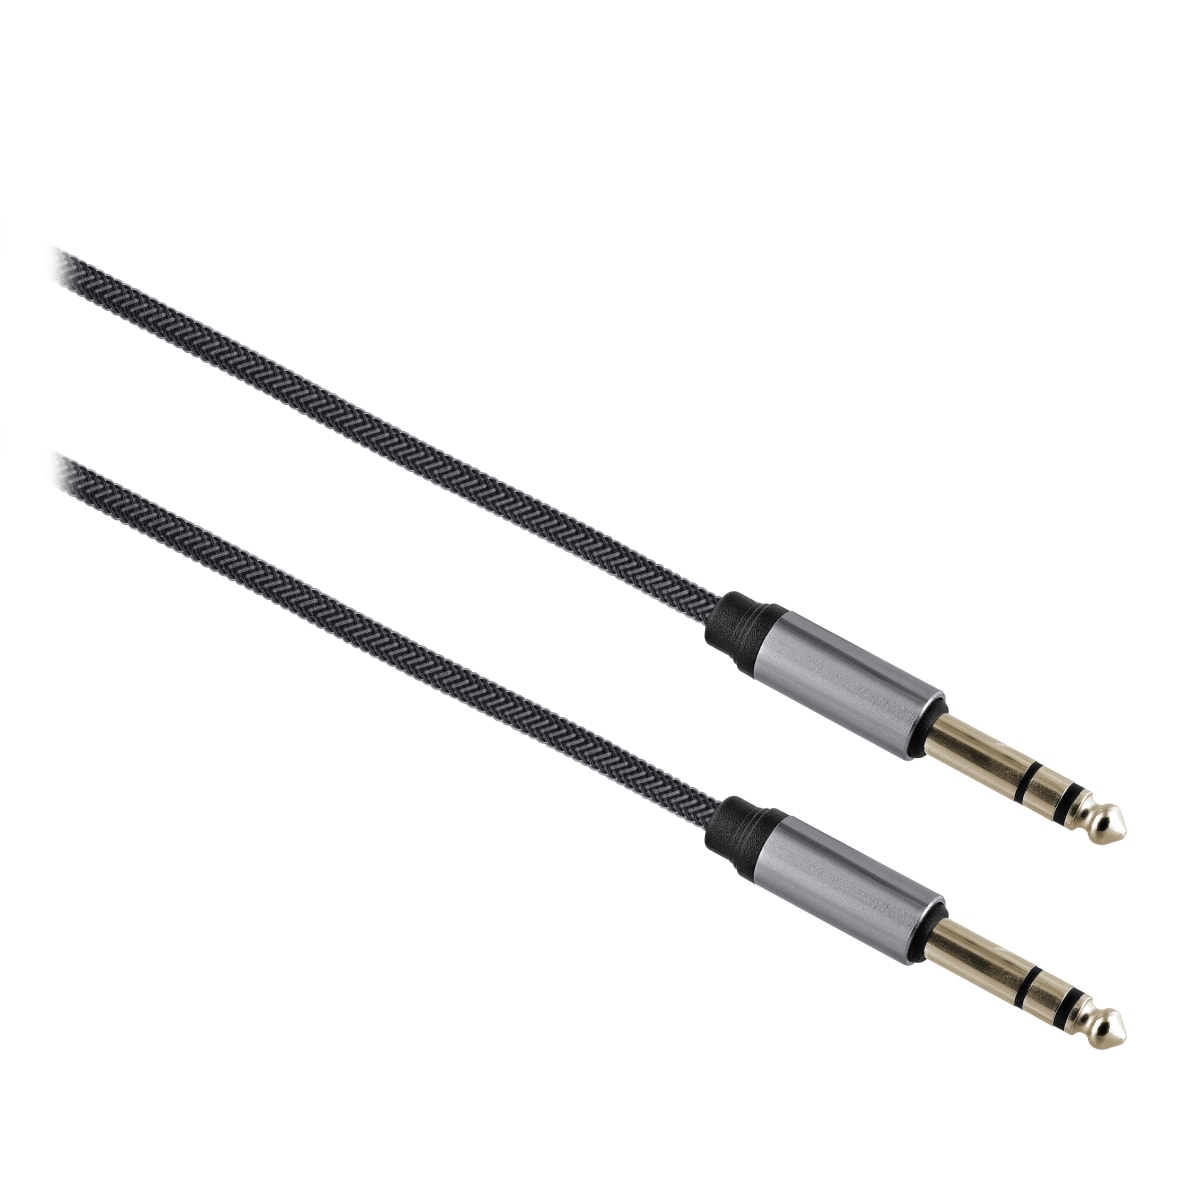 Jack 6,35mm male / jack 6,35mm male cable 3m